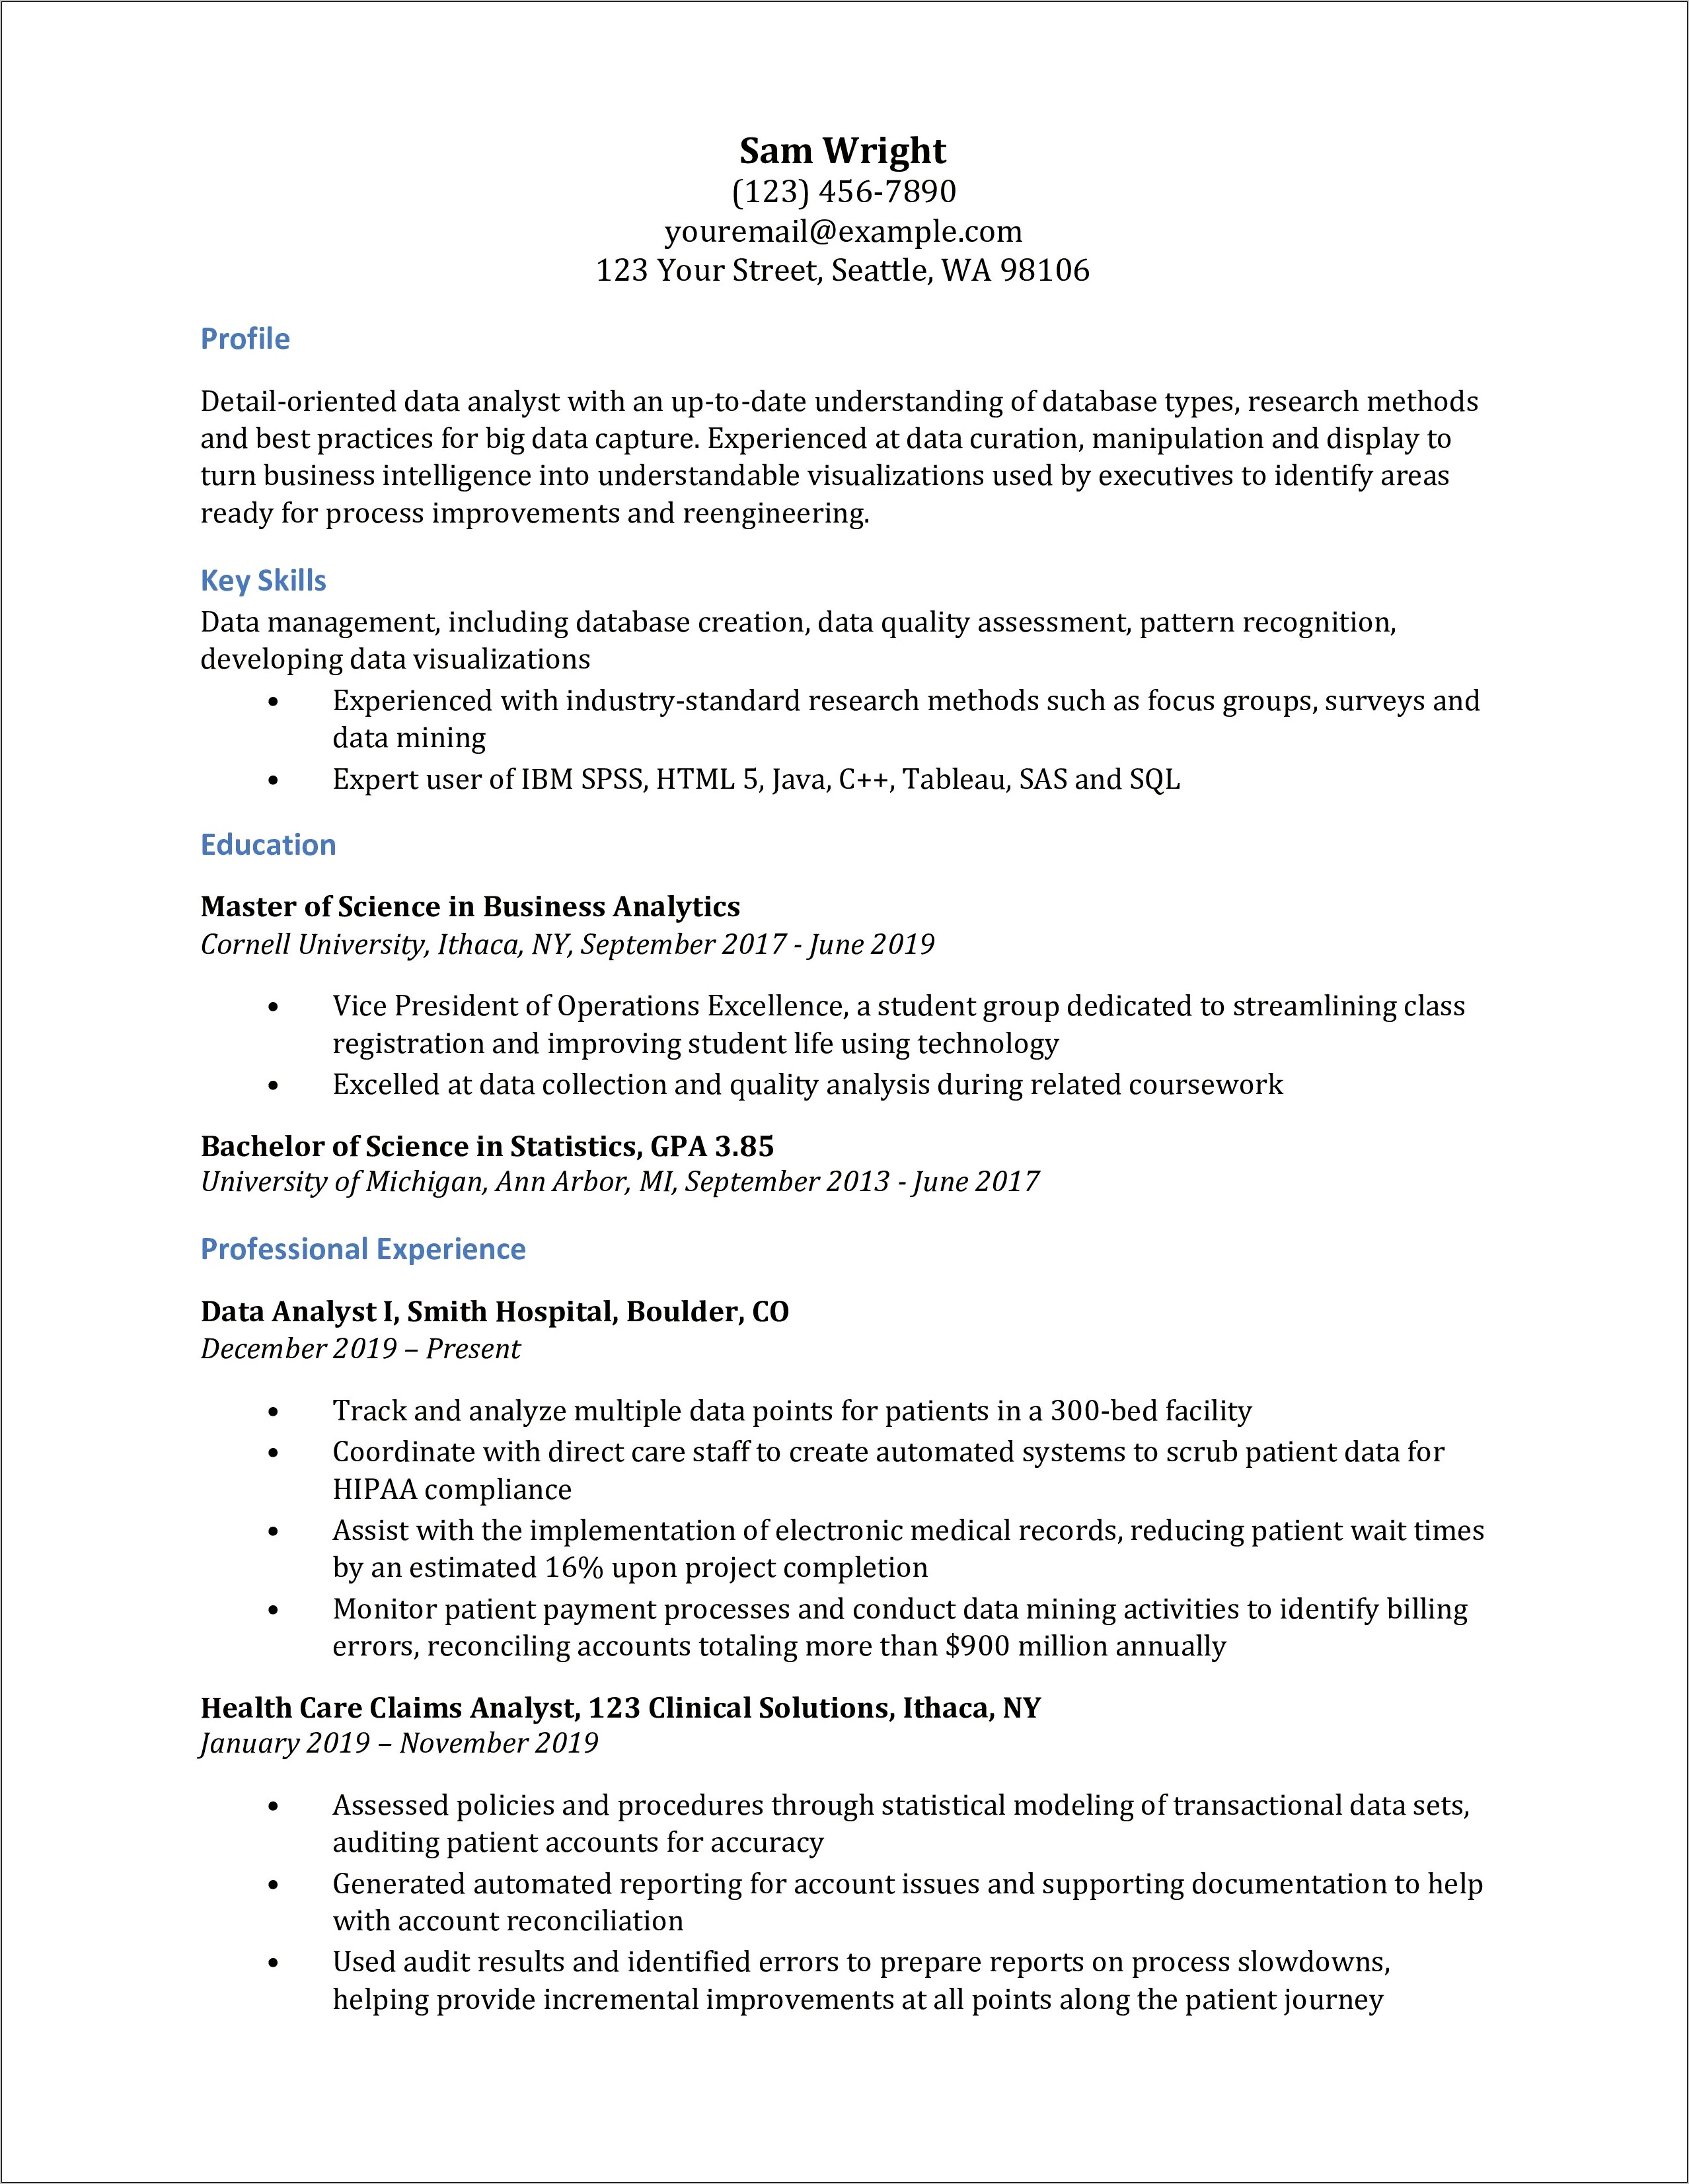 Business Analyst Resume With Emr And Ehr Experience